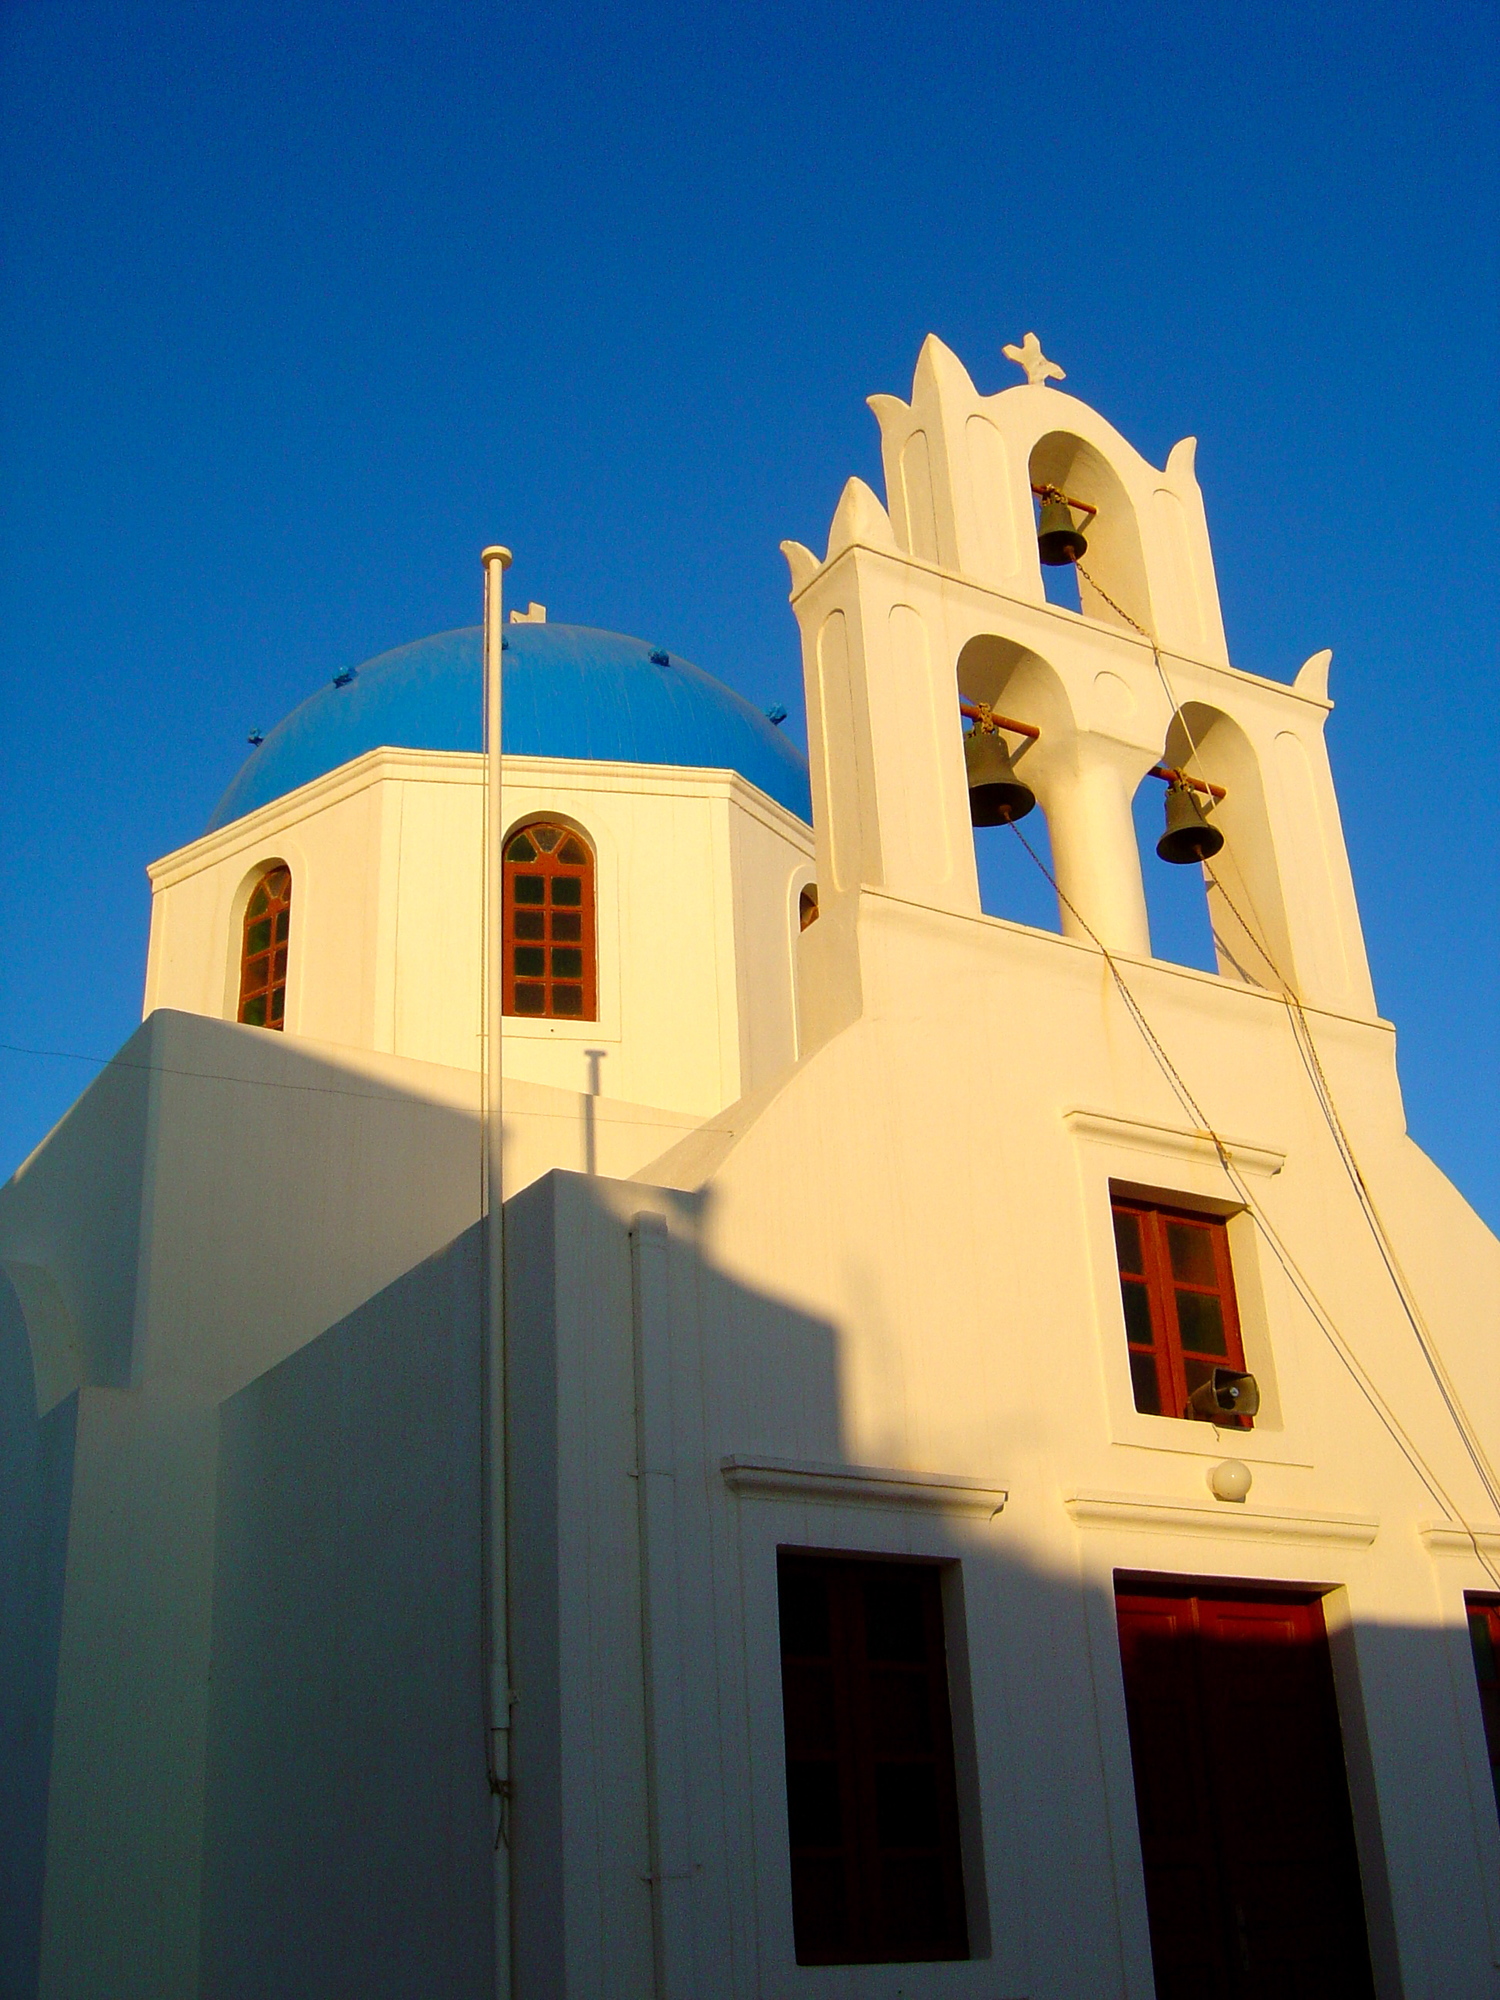 Greek, White and Blue: Why Are the Buildings in Greece Painted White